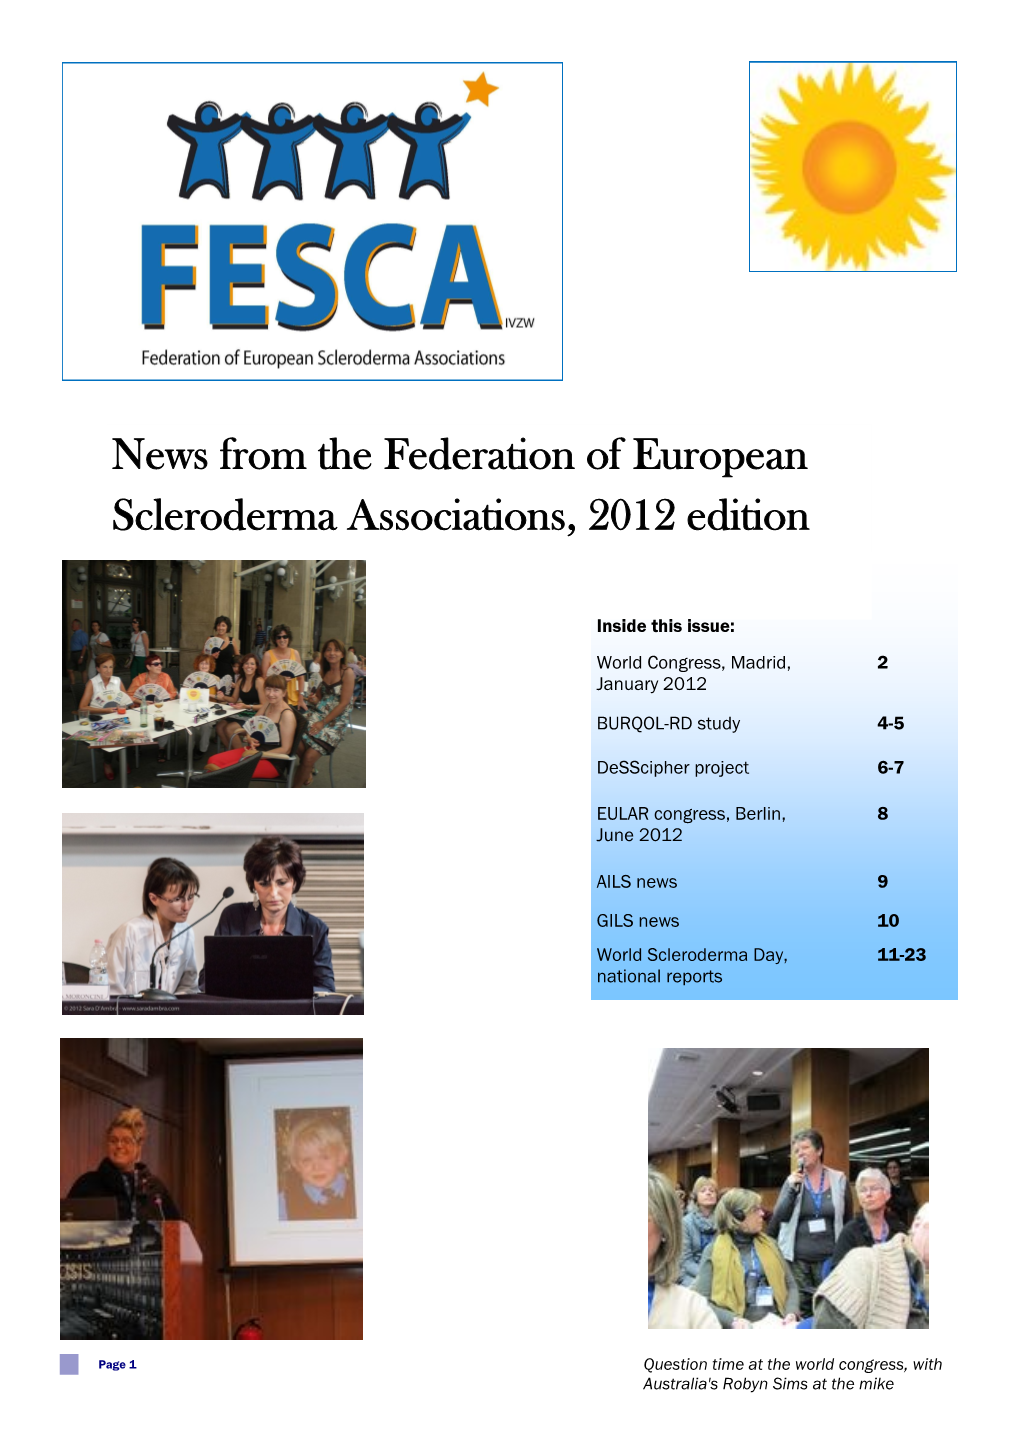 News from the Federation of European Scleroderma Associations, 2012 Edition